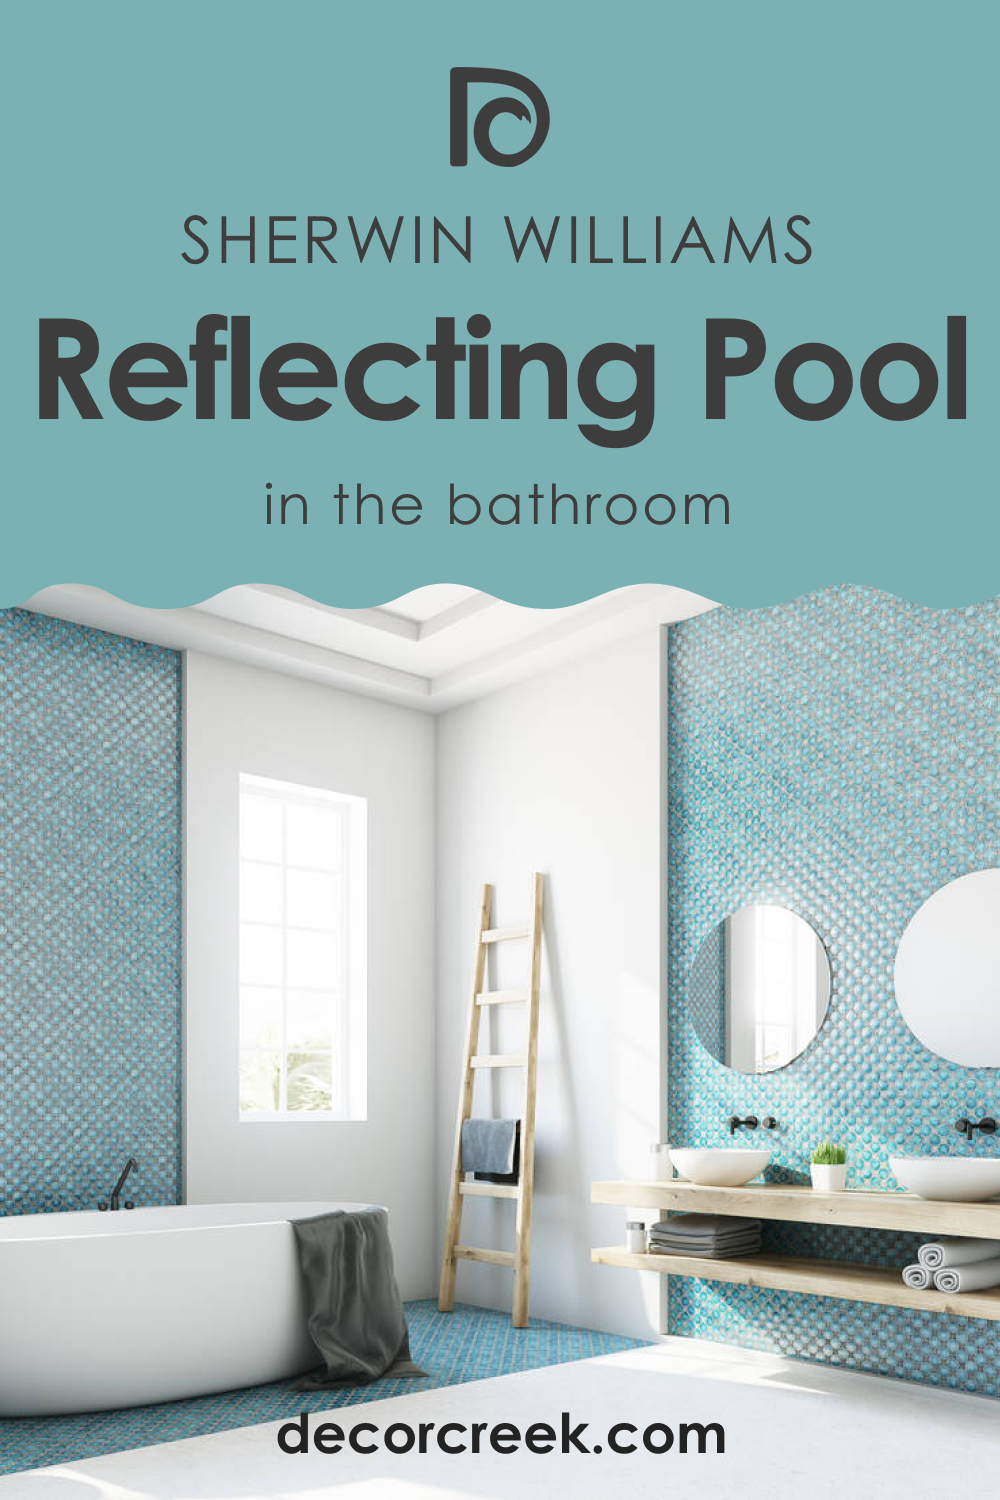 How to Use SW 6486 Reflecting Pool in the Bathroom?